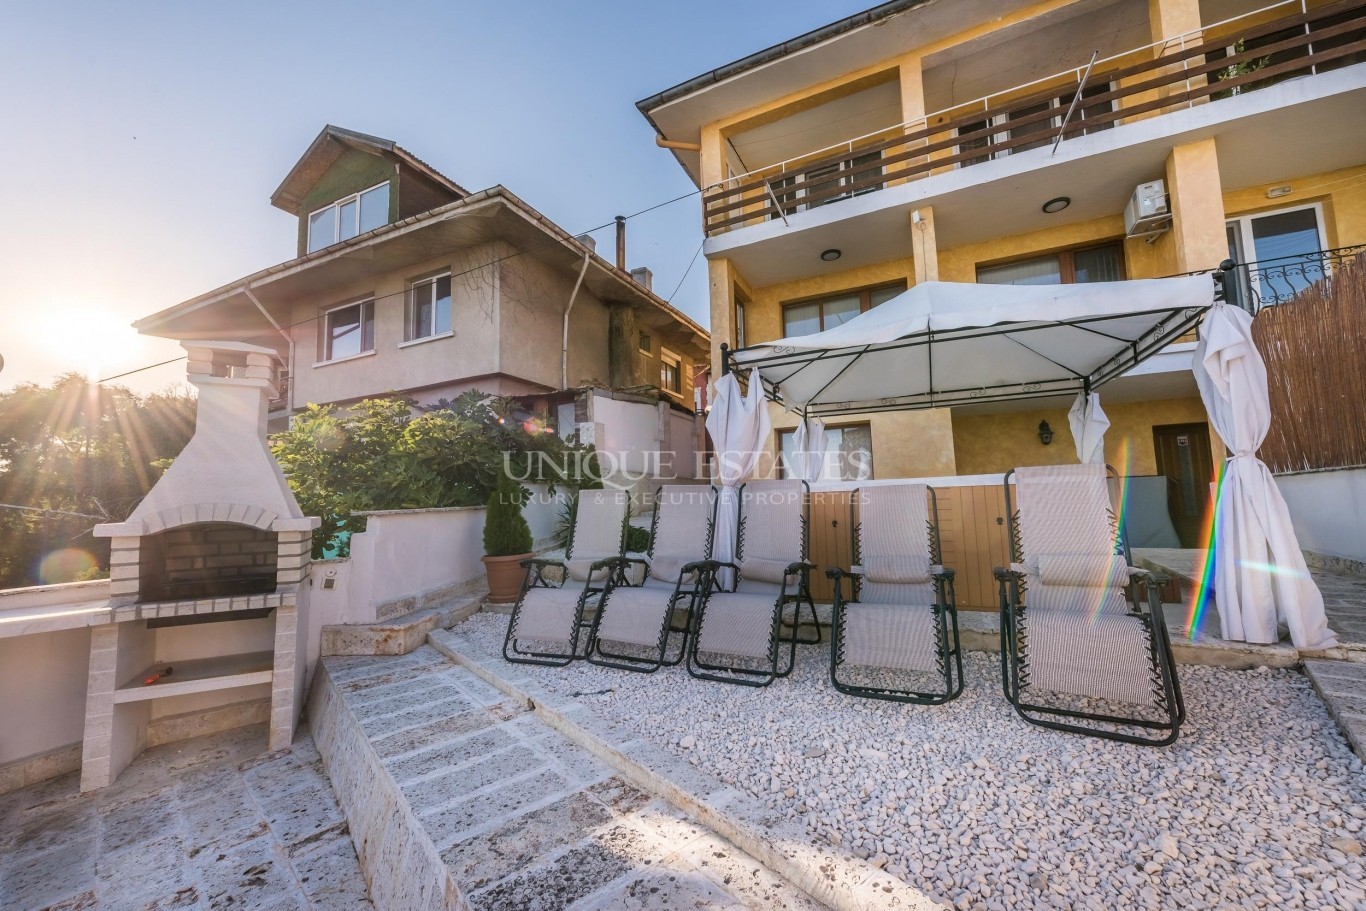 House for sale in Balchik,  with listing ID: K7773 - image 2